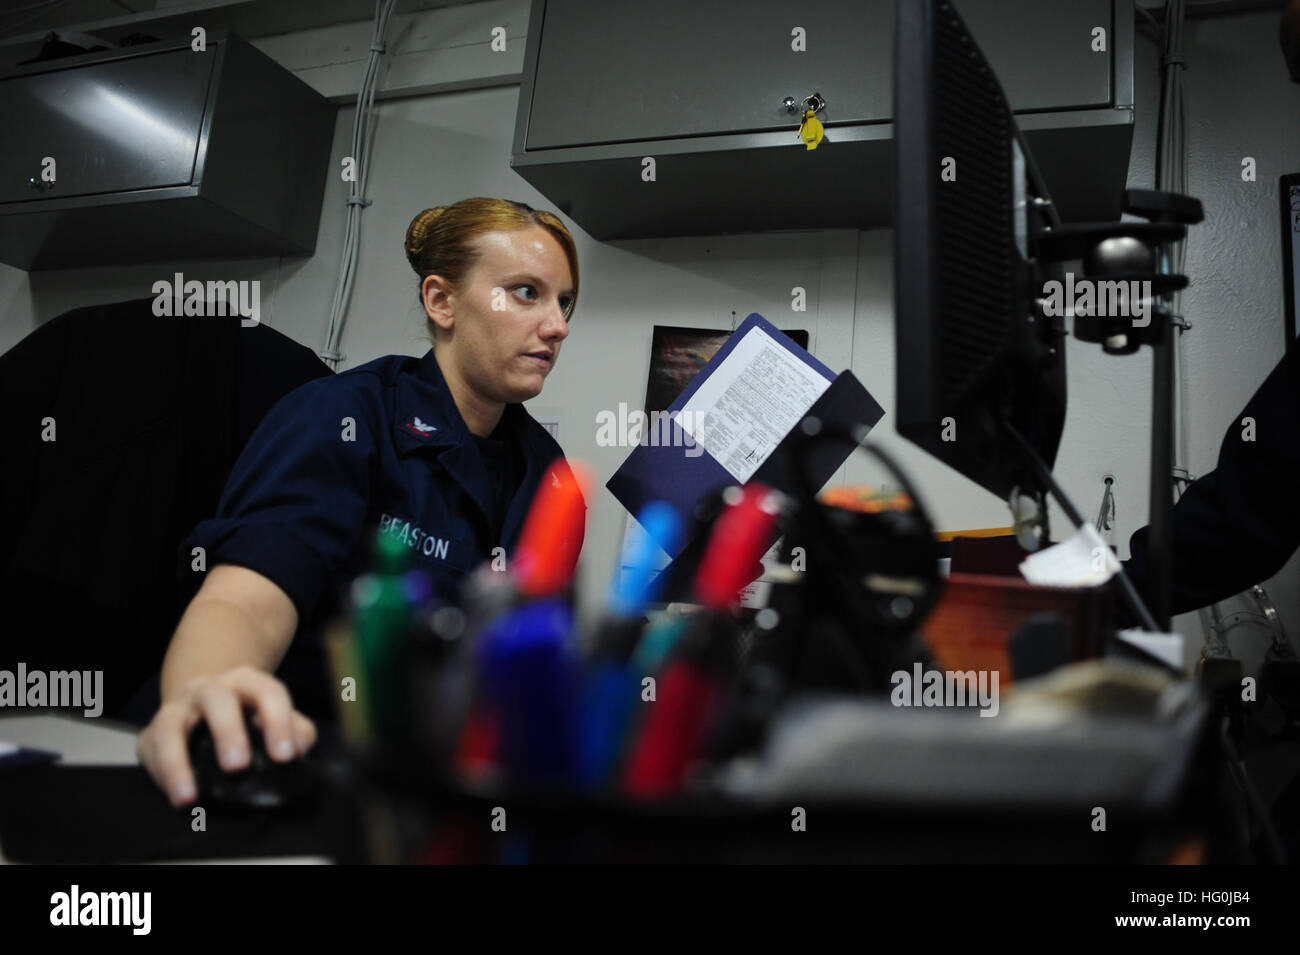 Yeoman 2nd Class Meghan Beaston checks her computer in the administration office aboard the amphibious assault ship USS Boxer (LHD 4). Boxer is deployed in the U.S. 7th Fleet area of responsibility conducting maritime security operations and theater security cooperation efforts as part of the Boxer Amphibious Ready Group. (U.S. Navy photo by Mass Communication Specialist 3rd Class Brian Jeffries/Released) USS Boxer operations 130909-N-SV688-043 Stock Photo